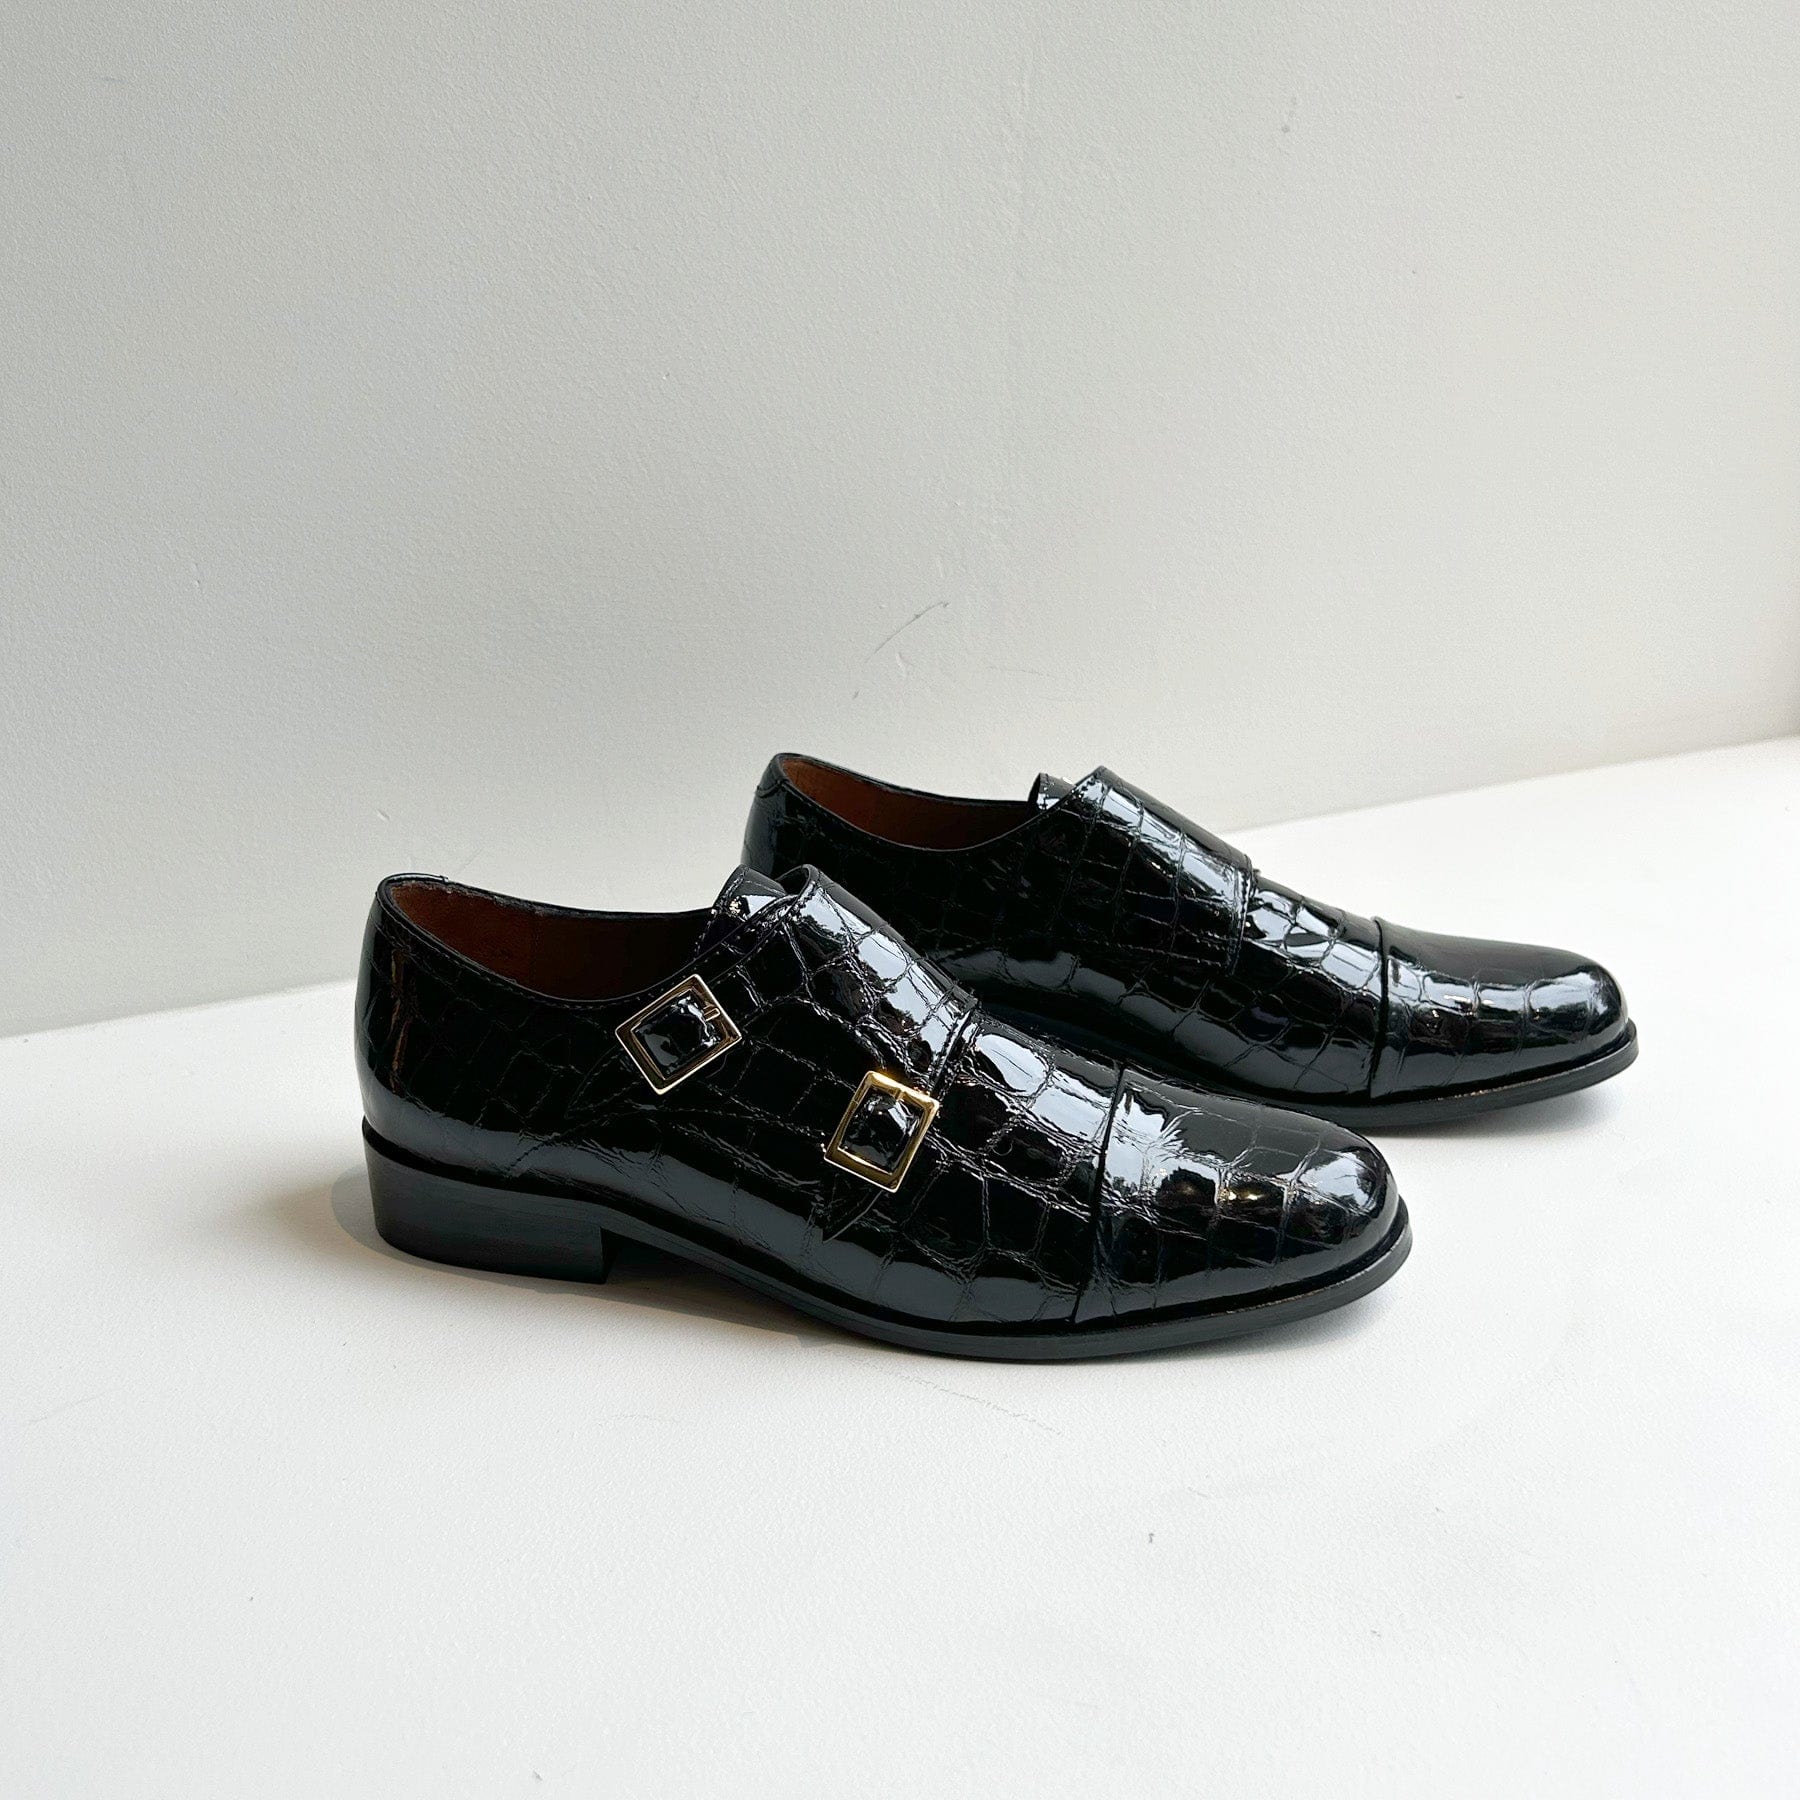 Mr. Thomas Loafer in Louisiana Black Shoes Anne Thomas 37  